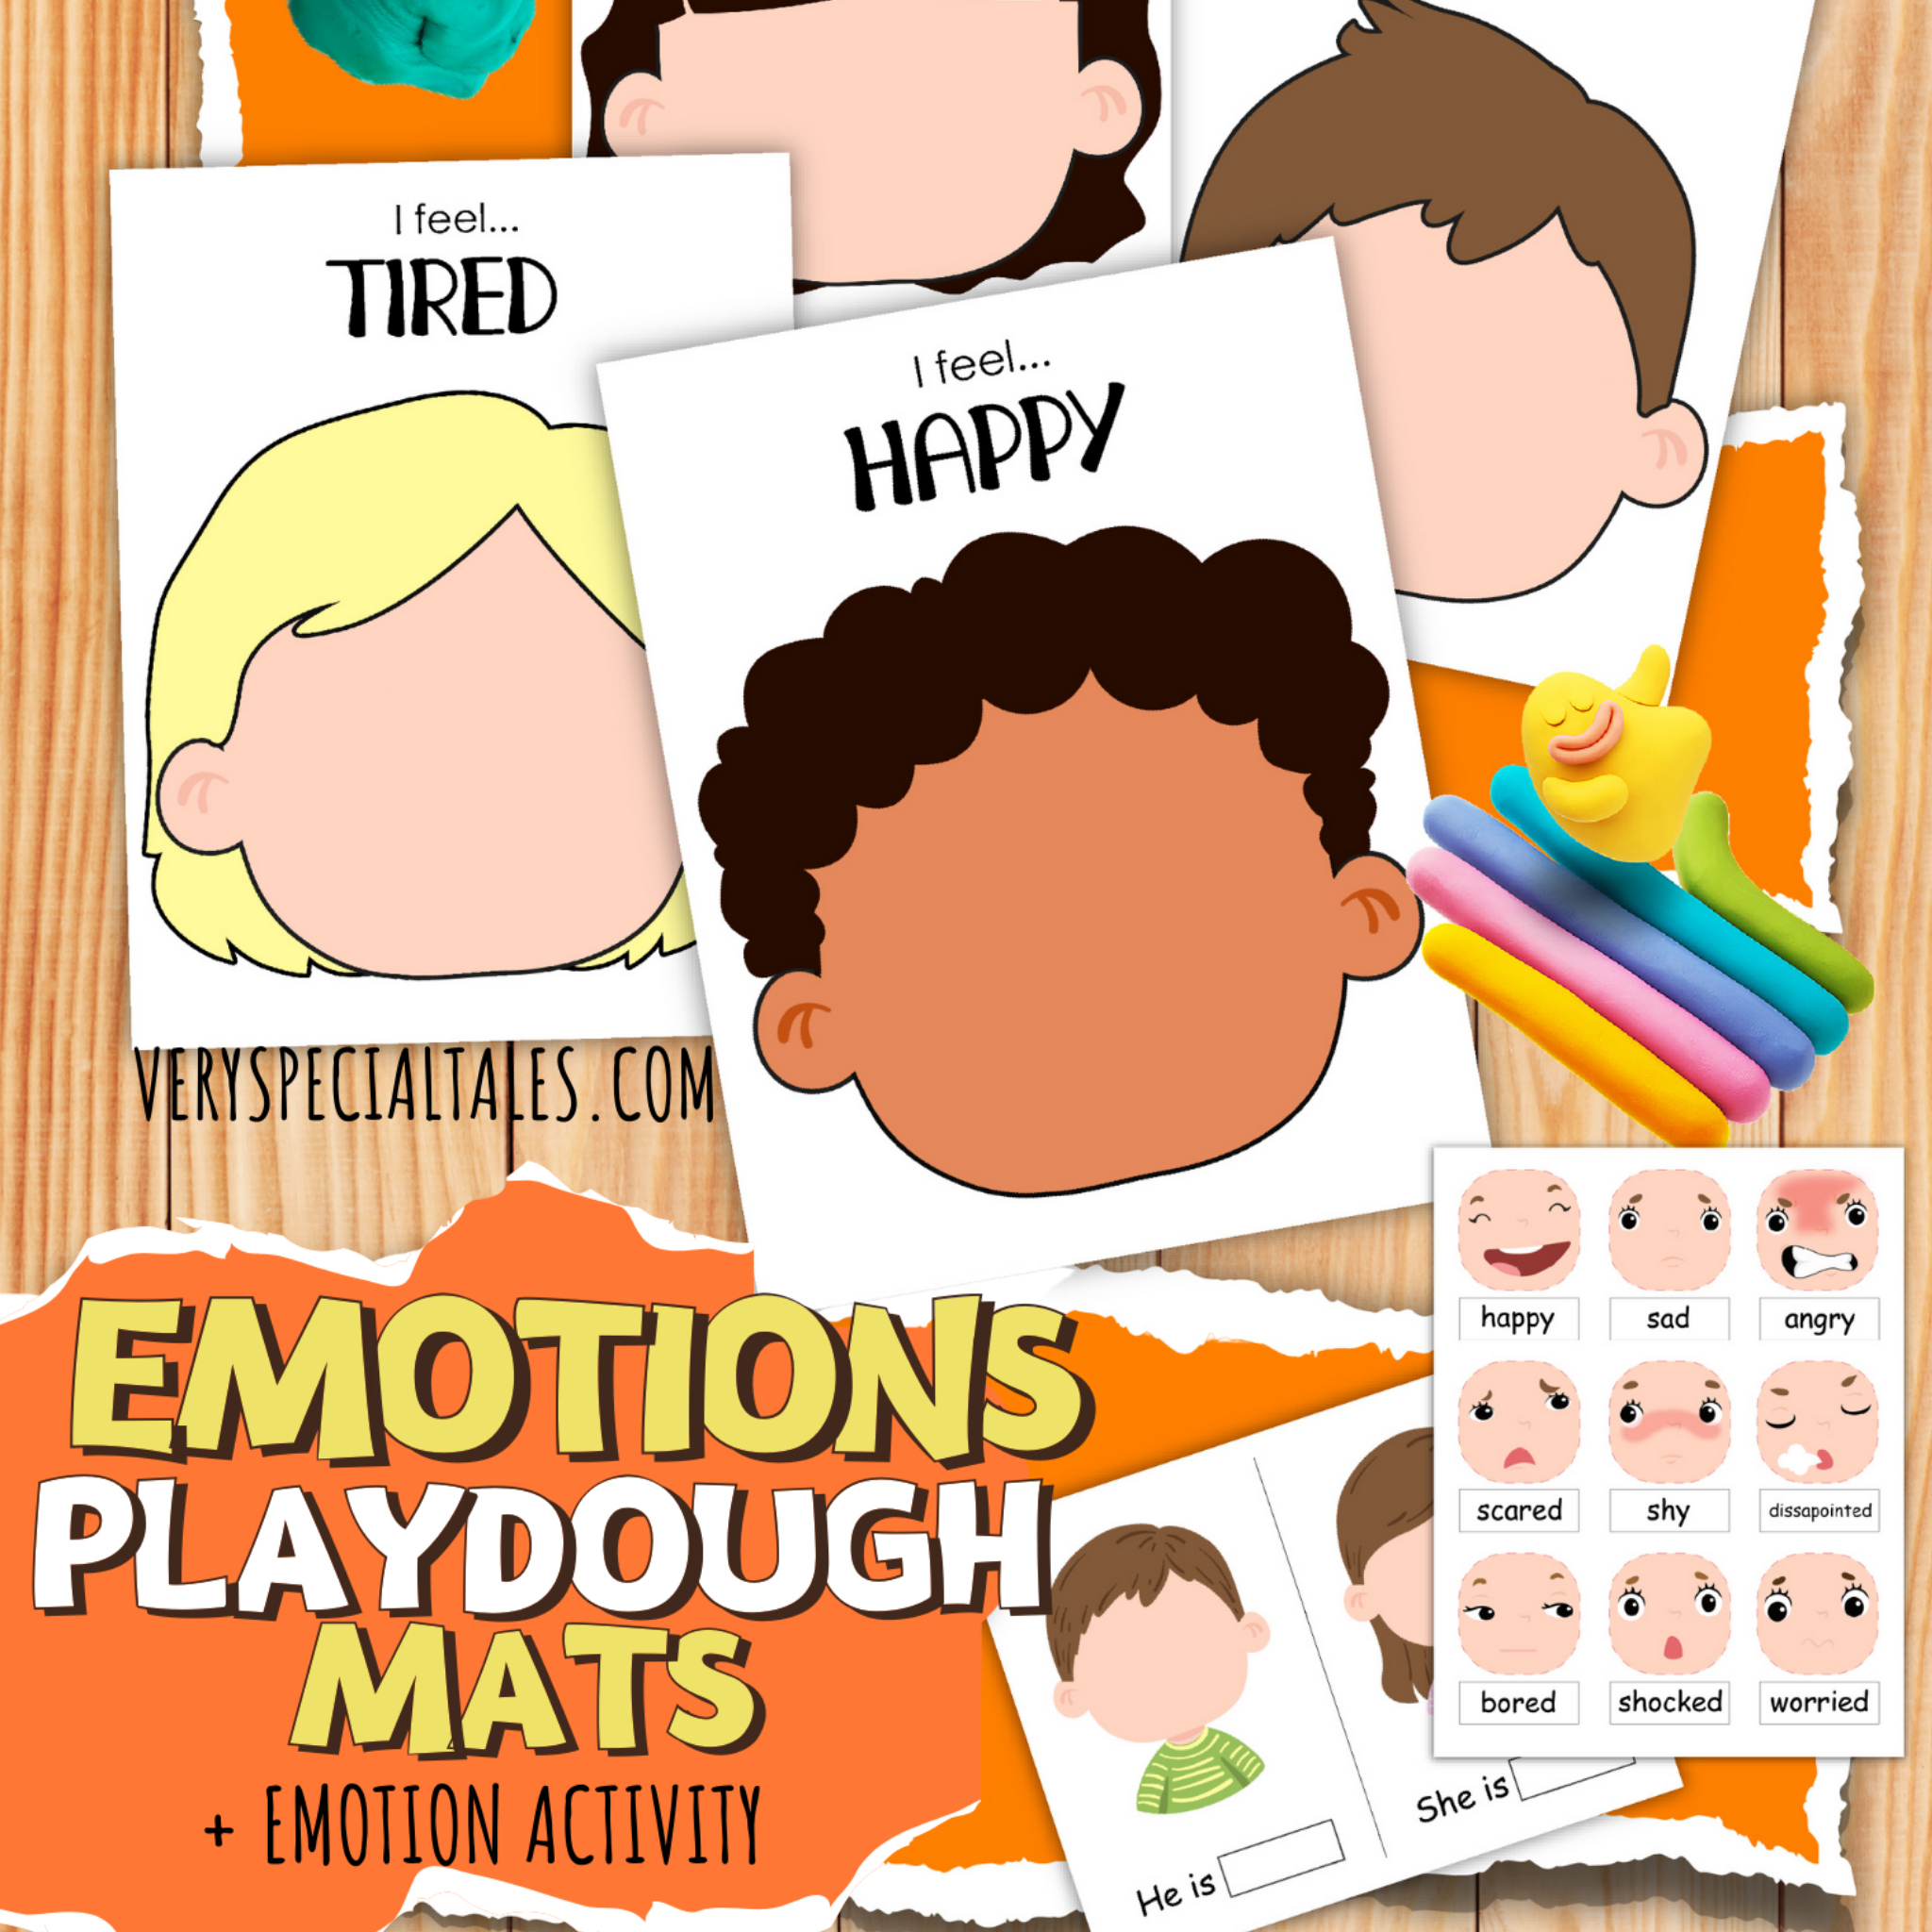 My Emotions Play Dough Mats - $3.50 : File Folder Heaven - Printable,  Hands-On Fun with File Folder Games